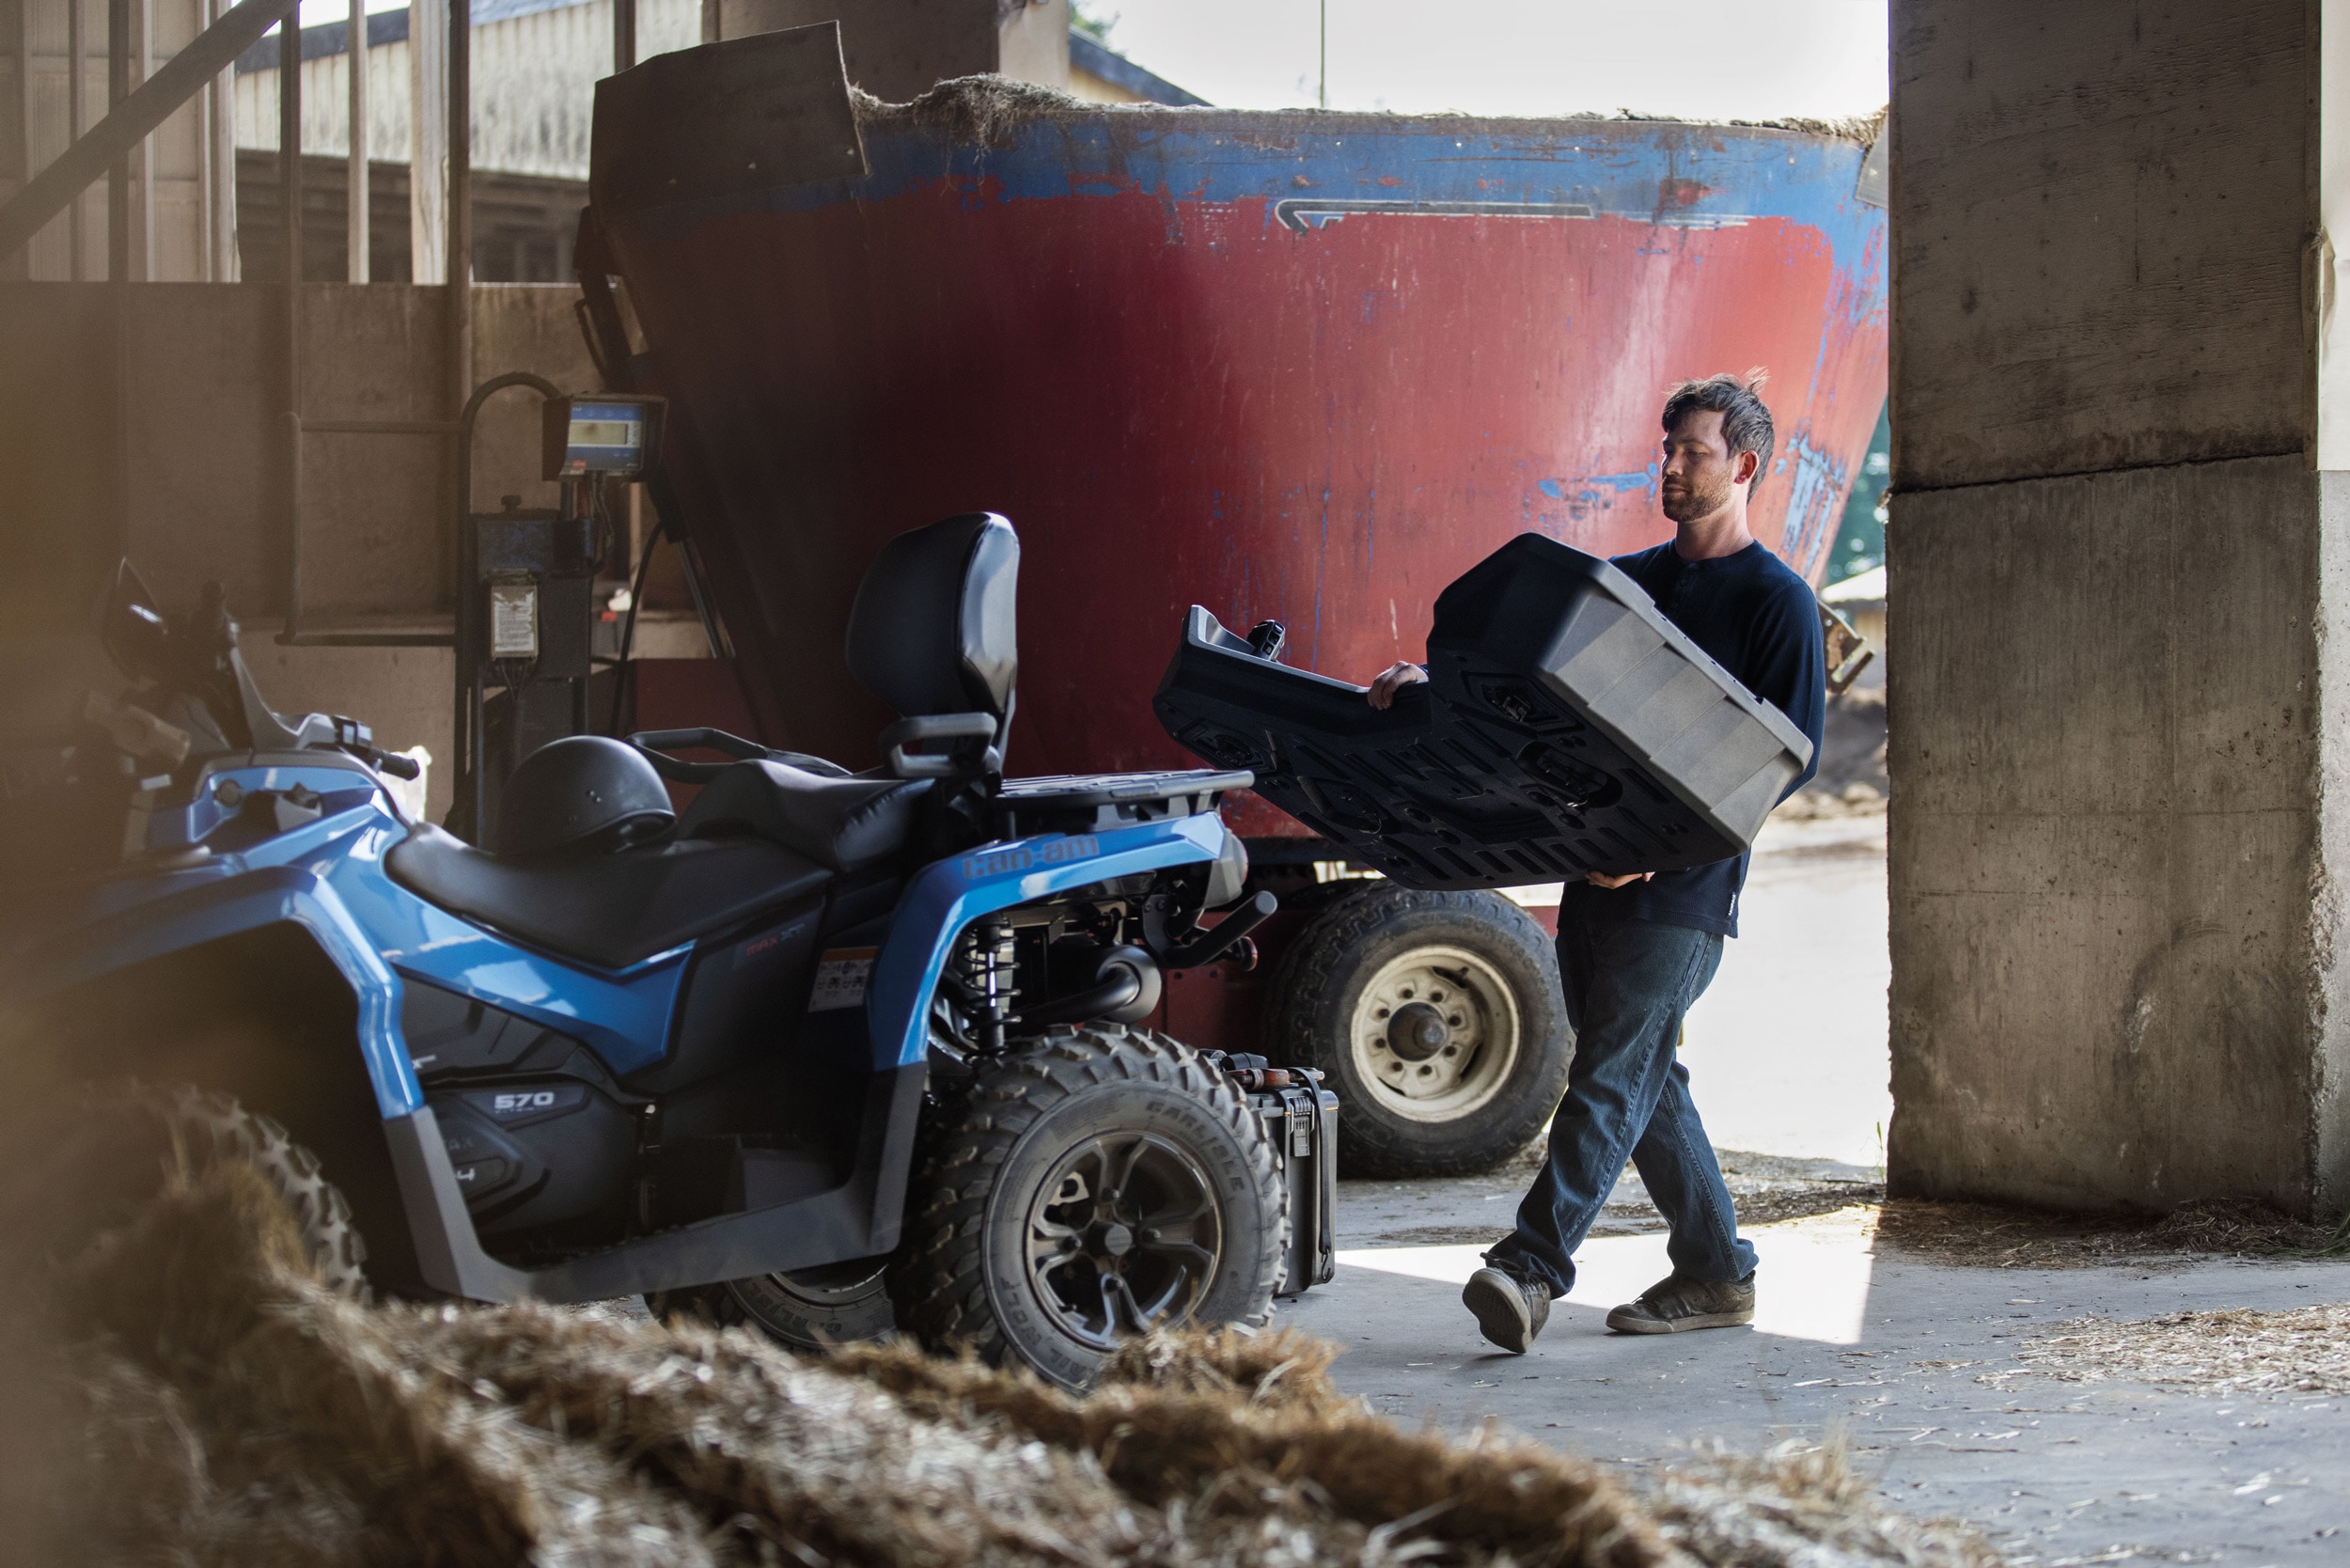 Men farming with a Can-Am ATV Vehicle